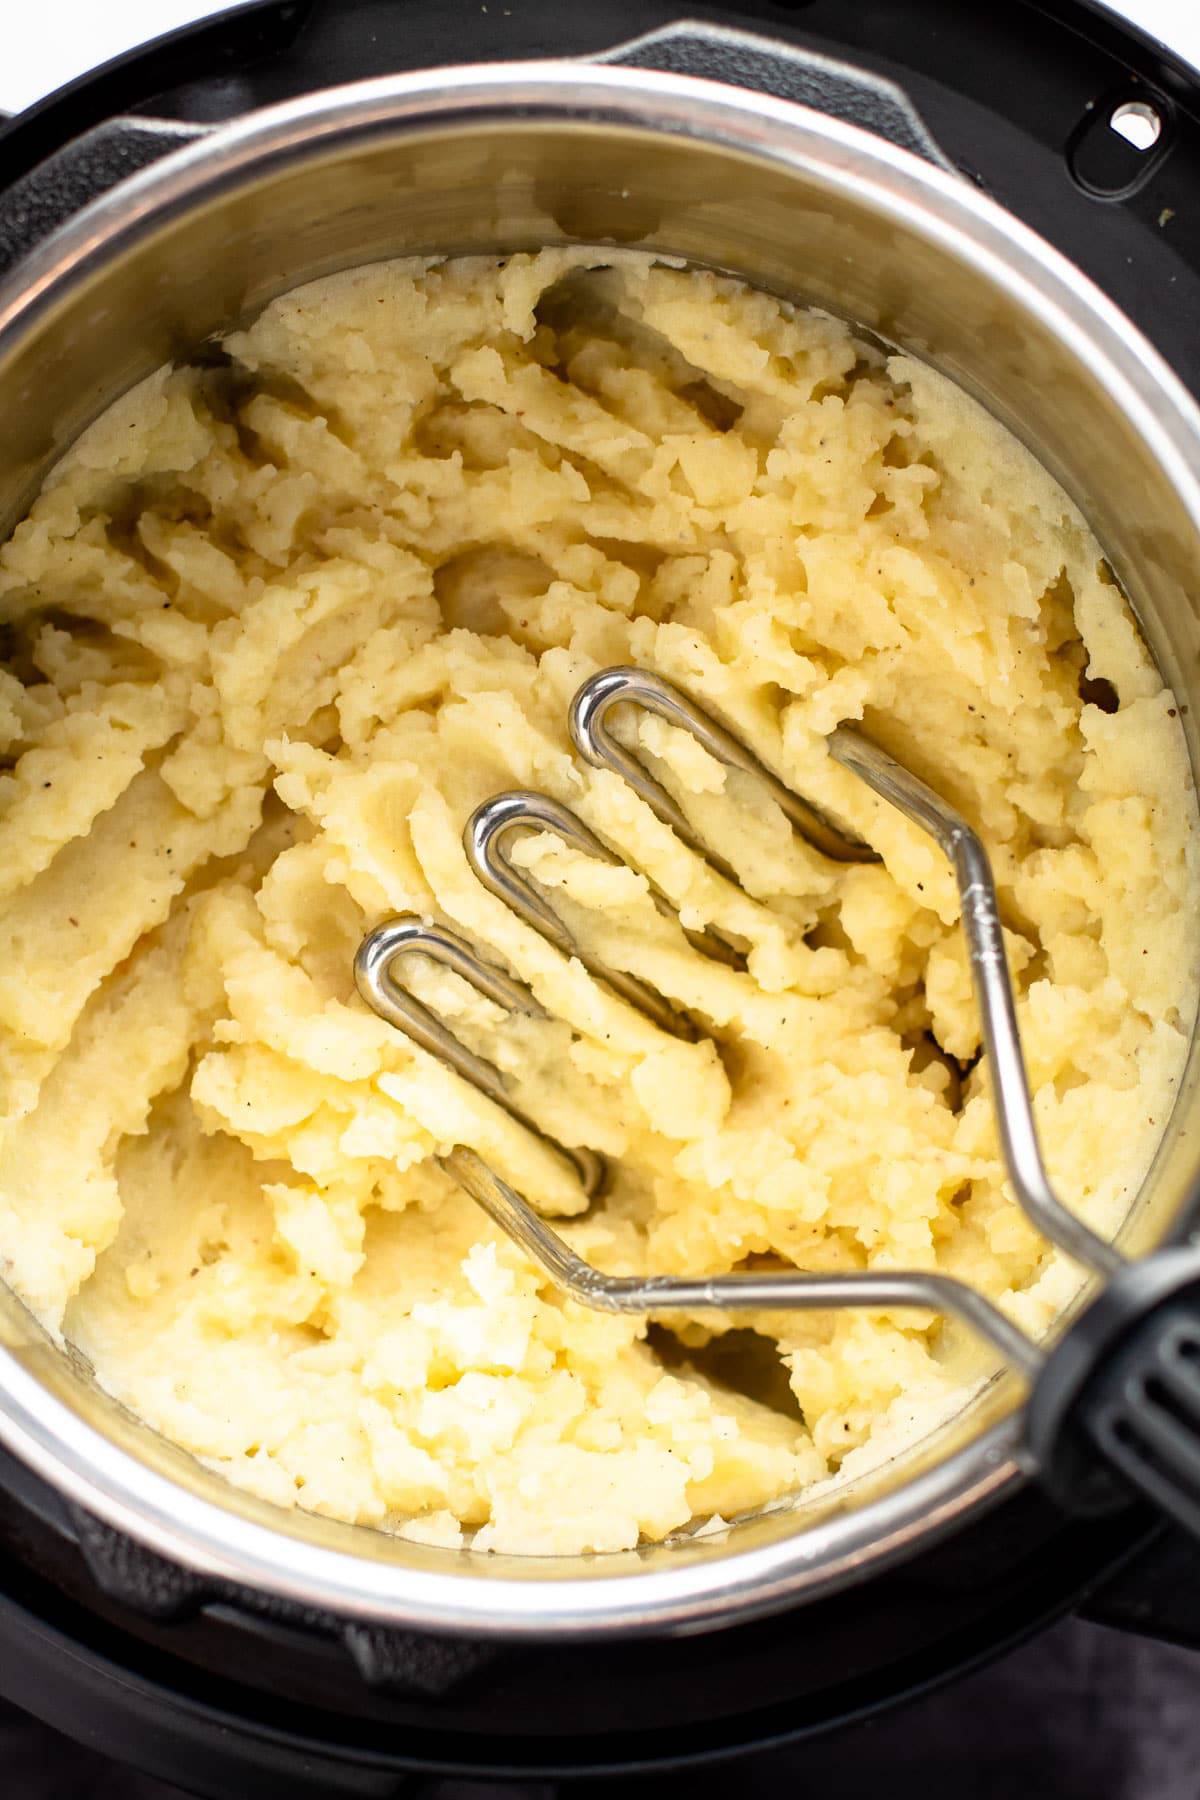 Mashed potatoes in the instant pot.